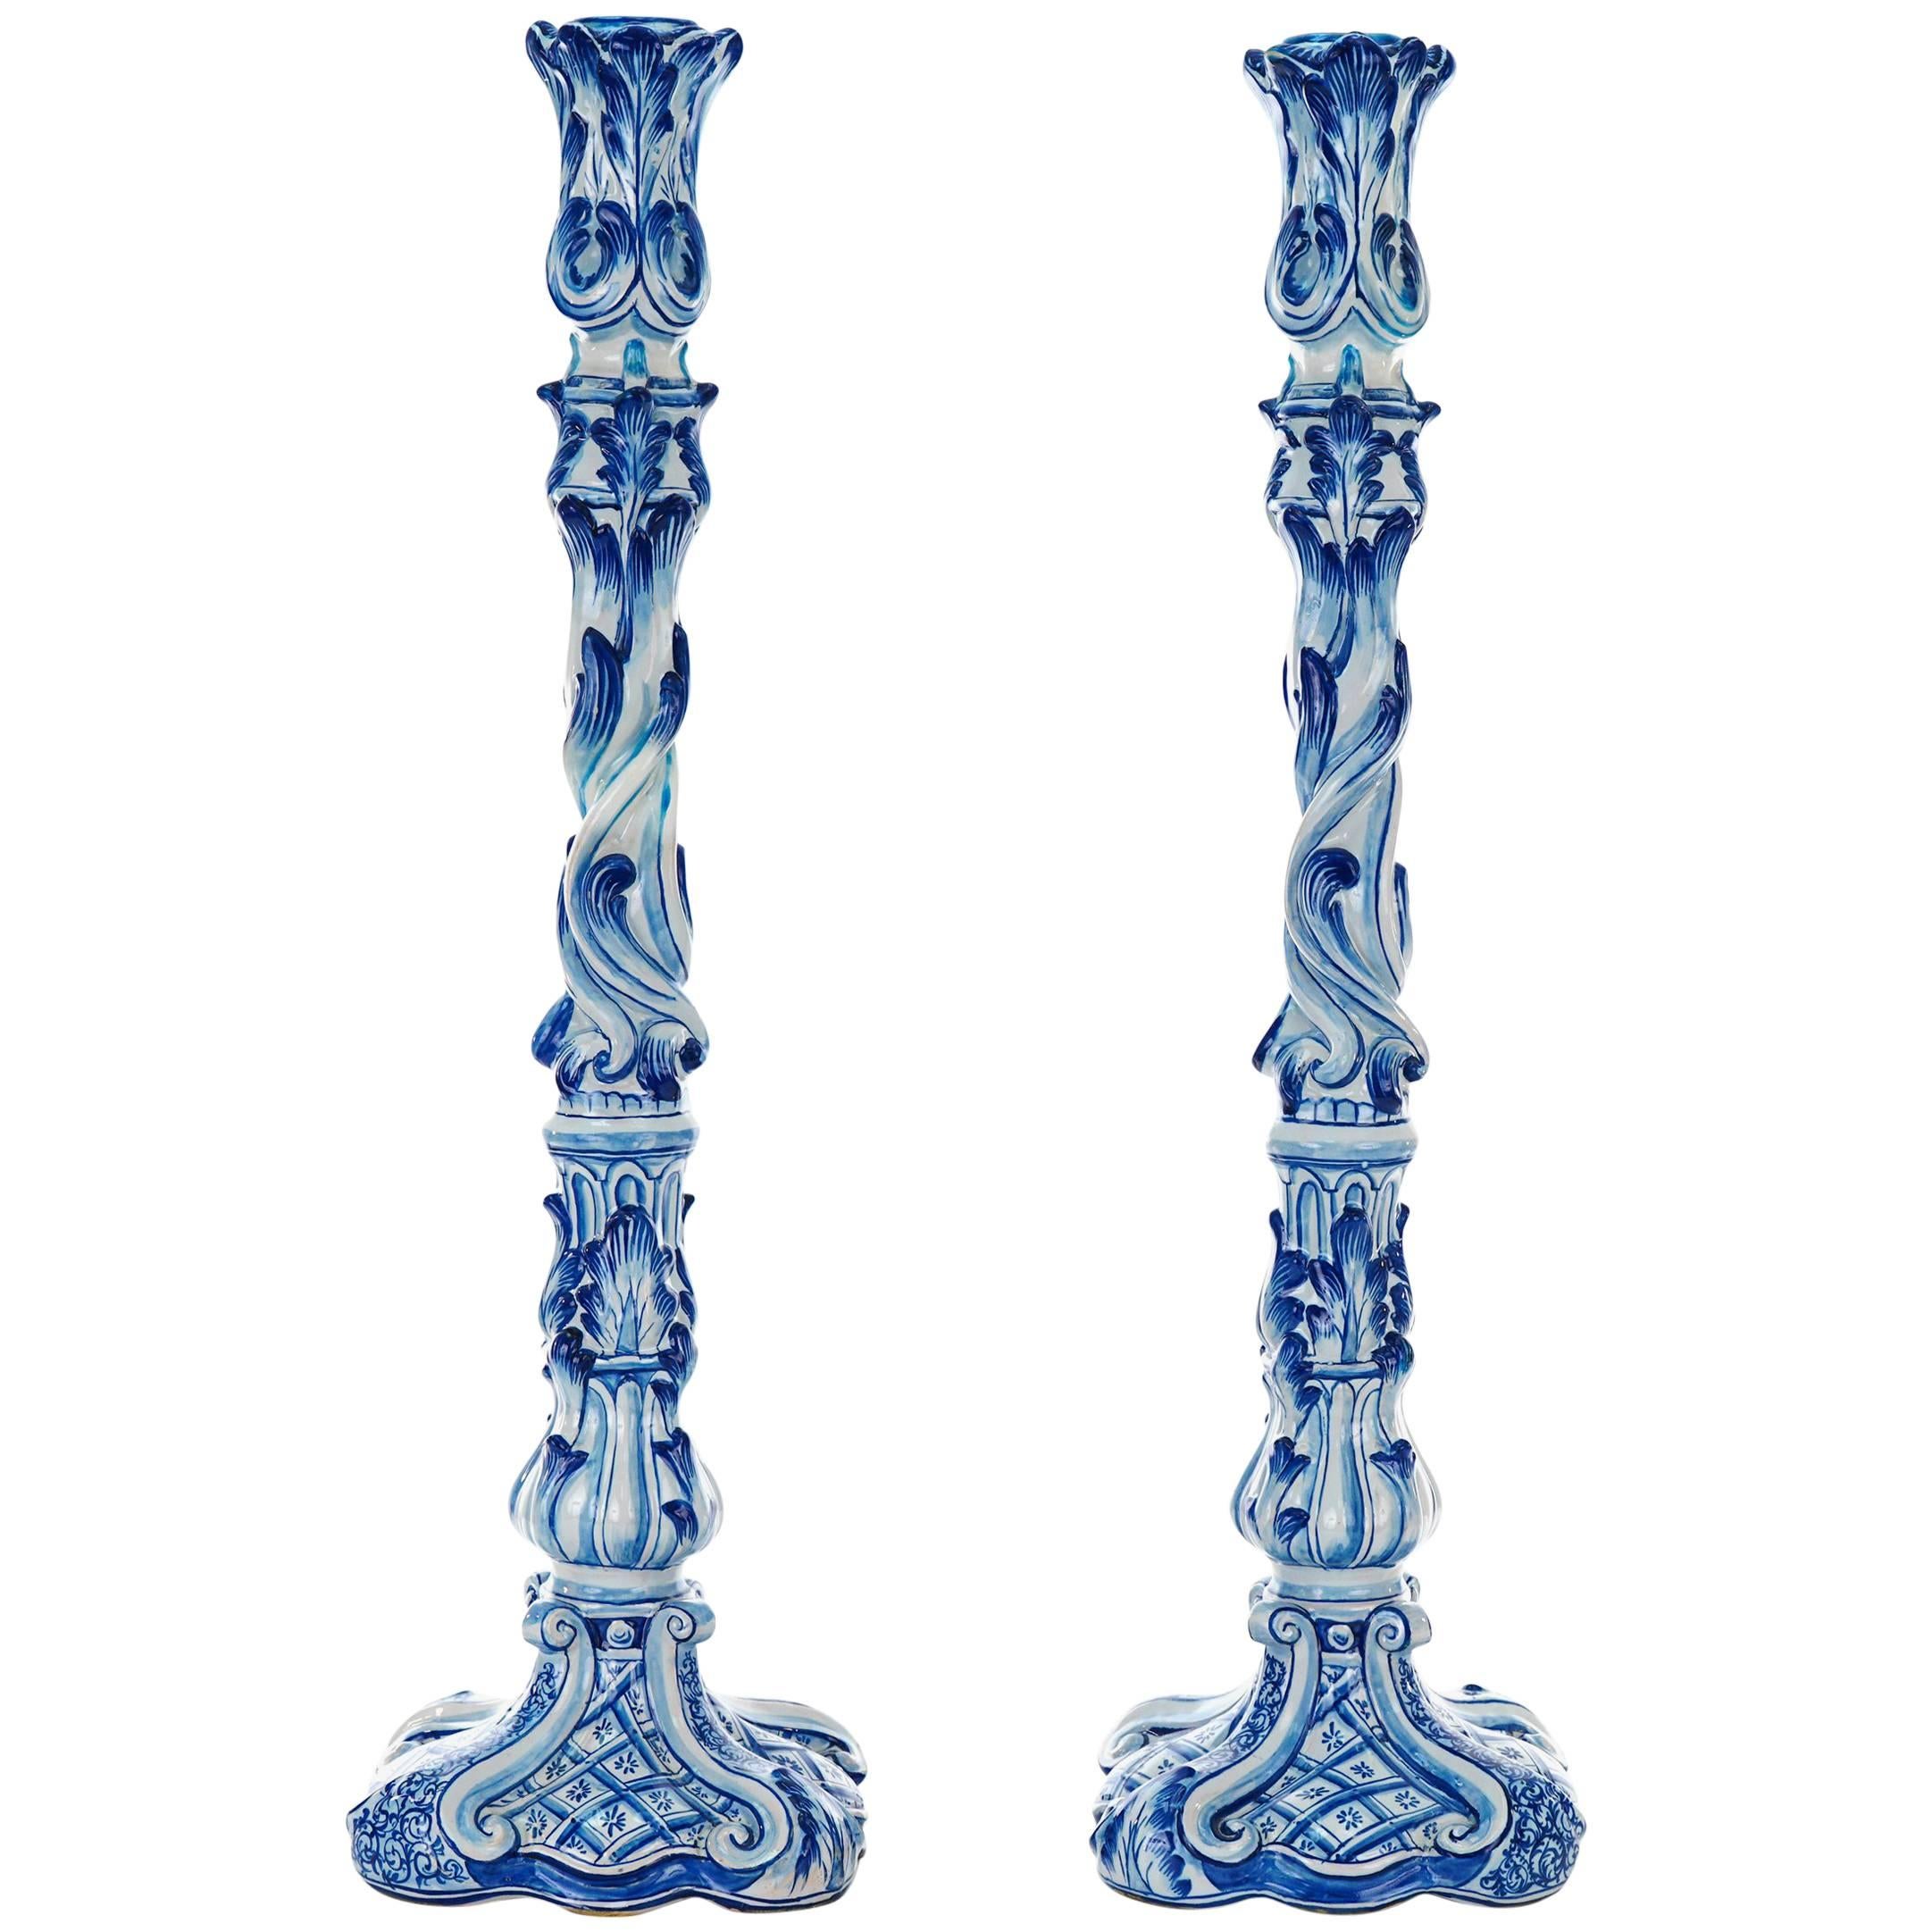 Spectacular 28 inch Tall Pair of Blue Faience Candlesticks c1913 France